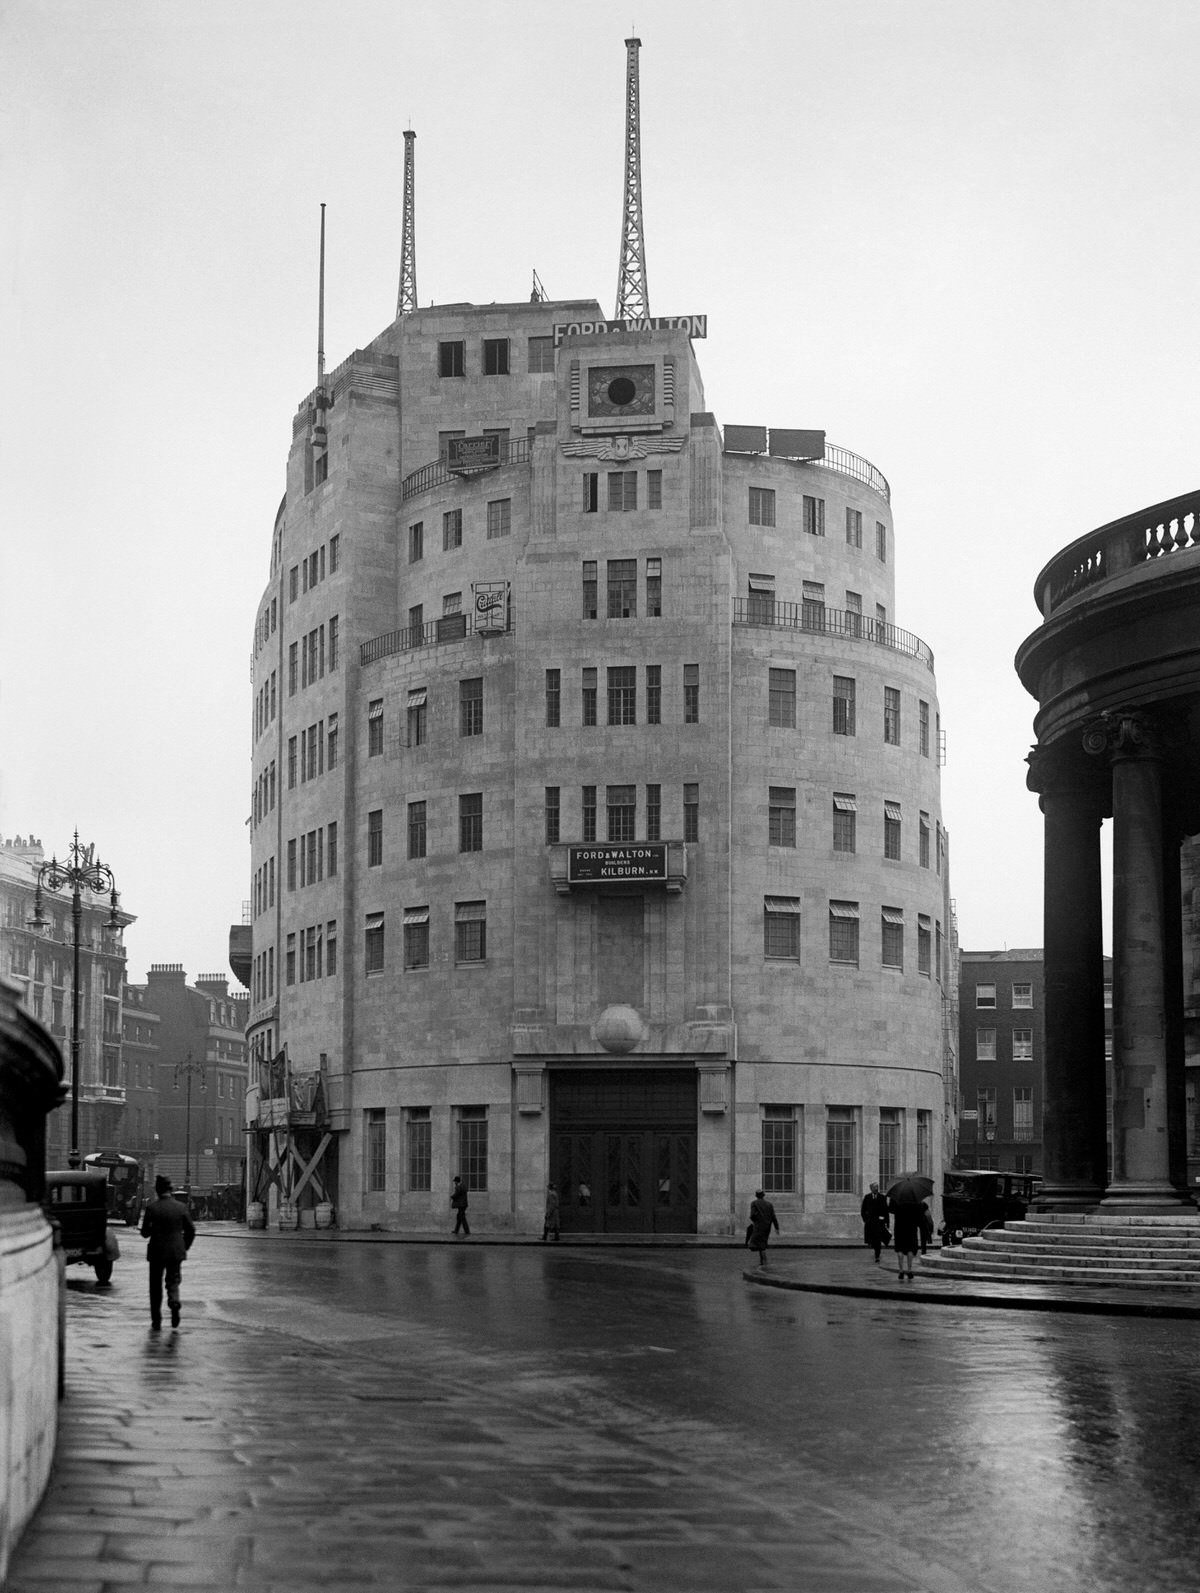 A view of the newly-built BBC Broadcasting House in a wet central London, 1931.